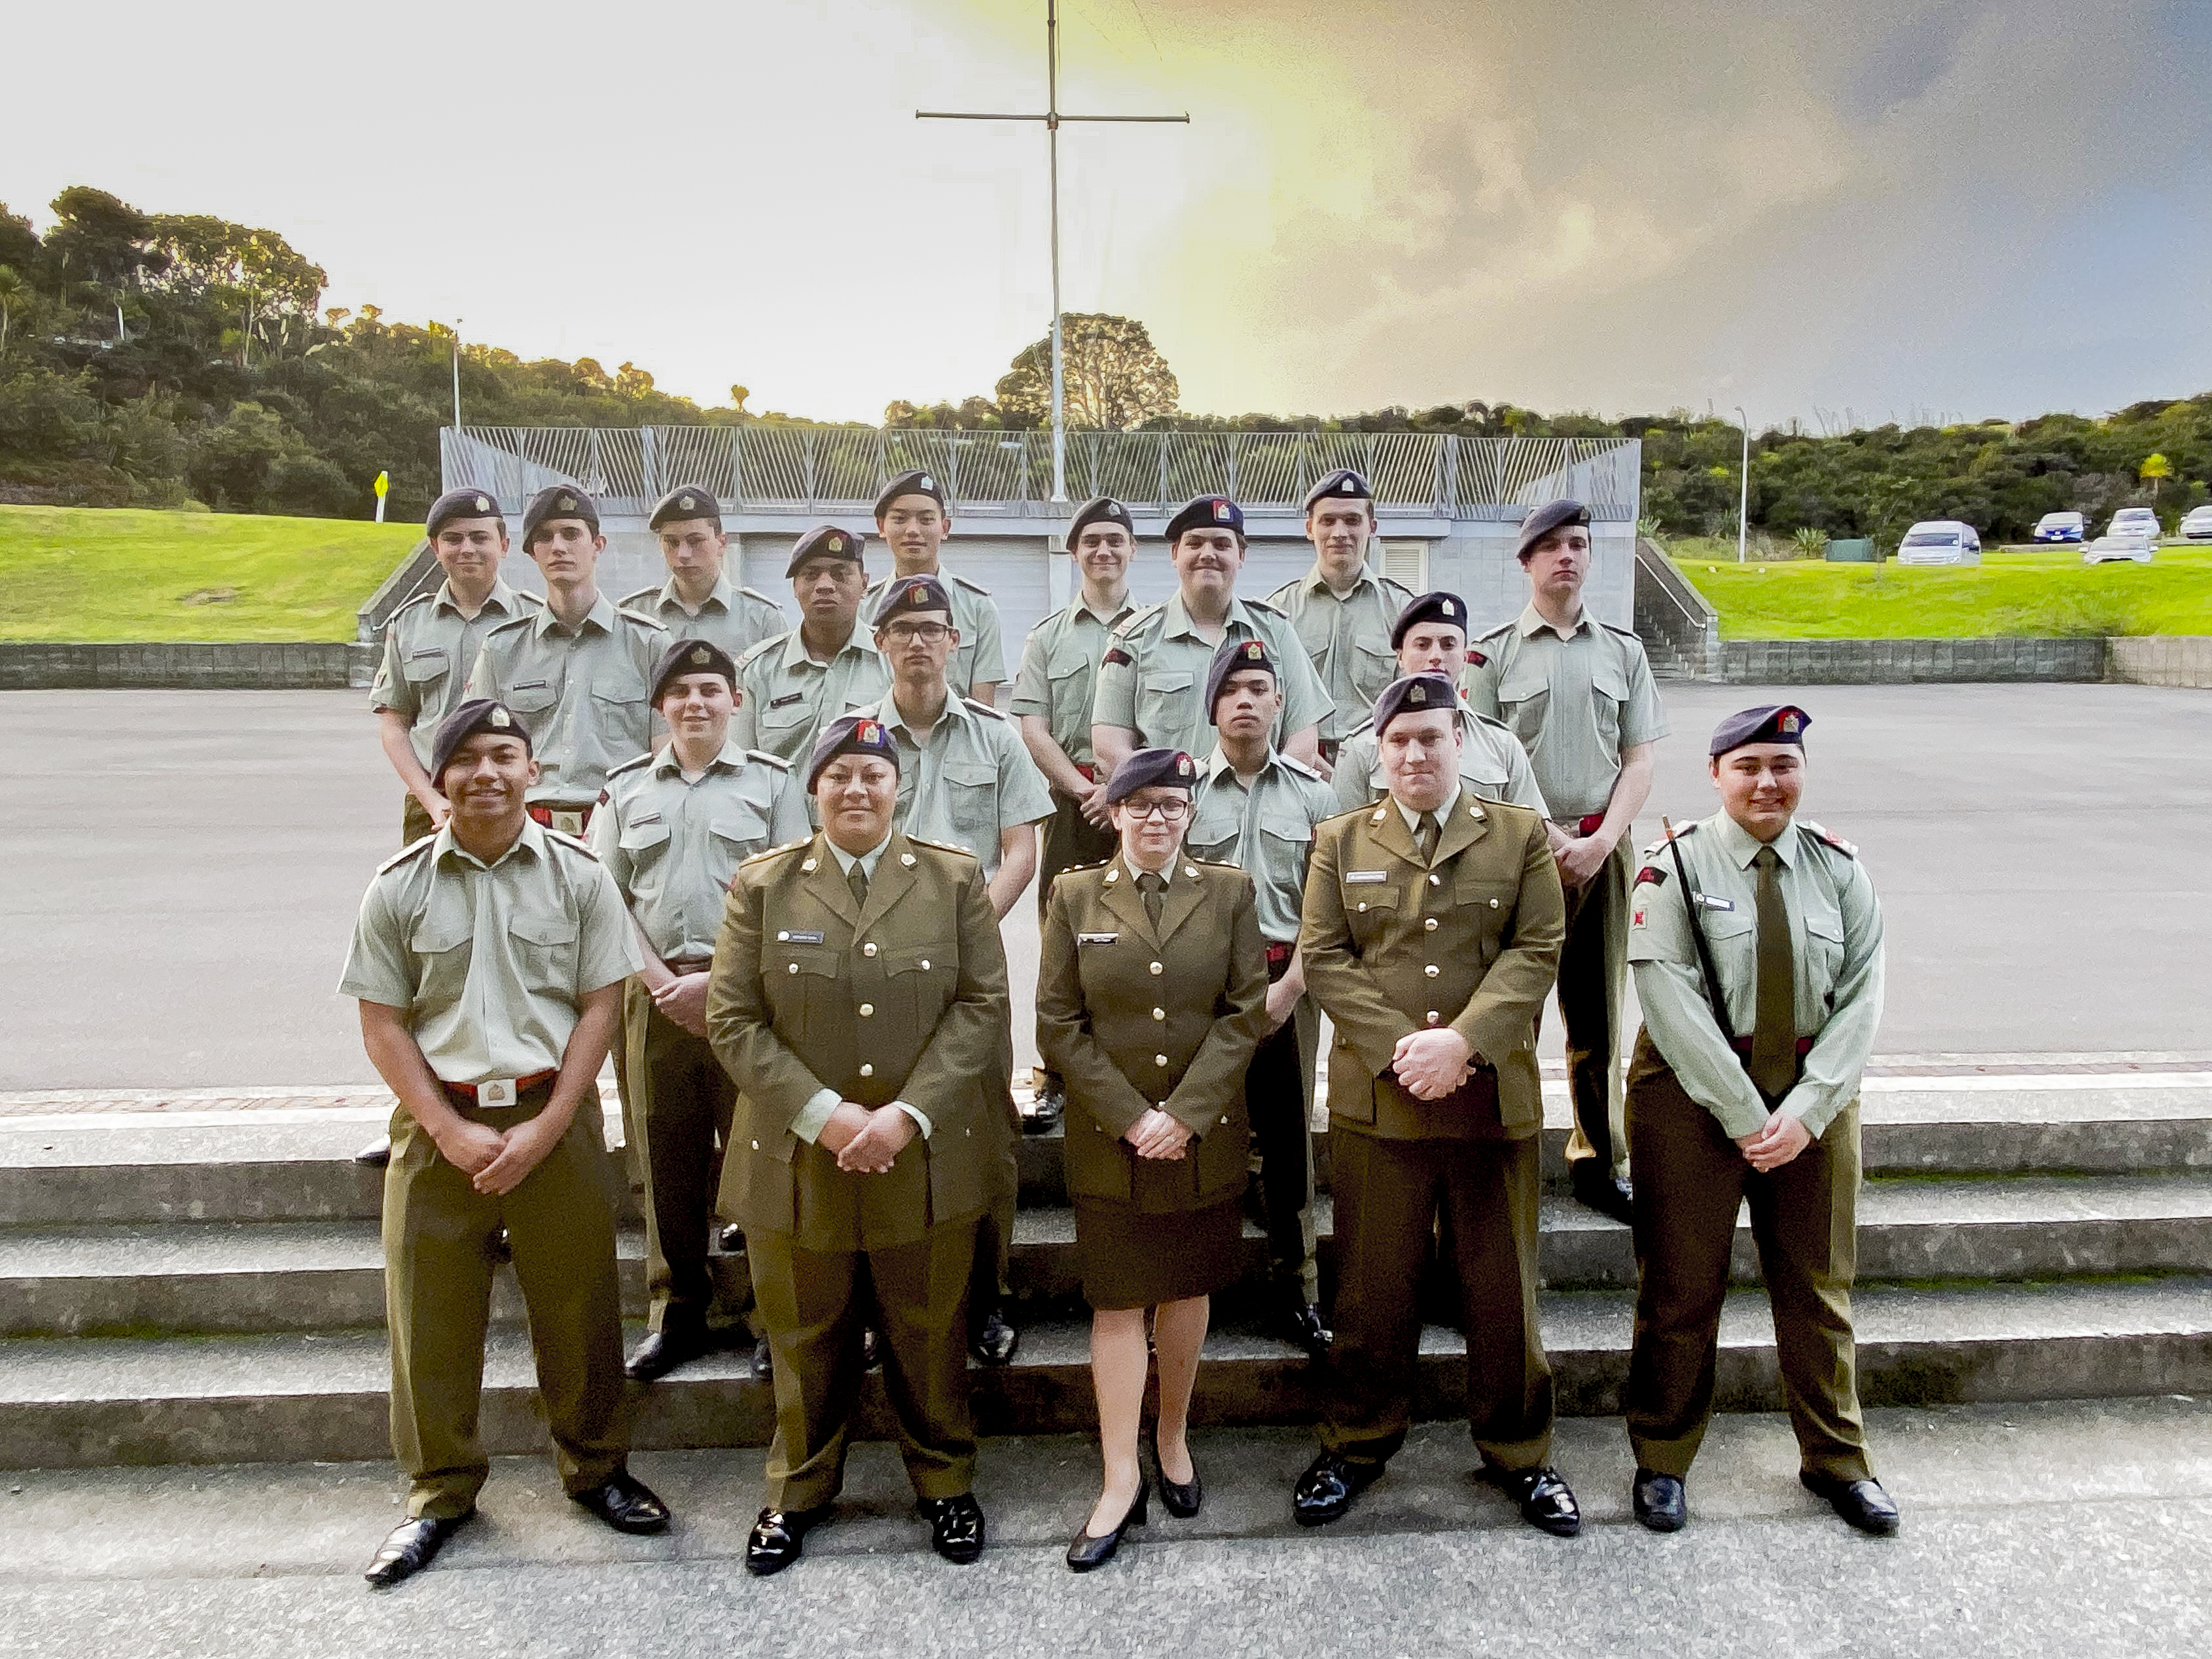 Army cadets